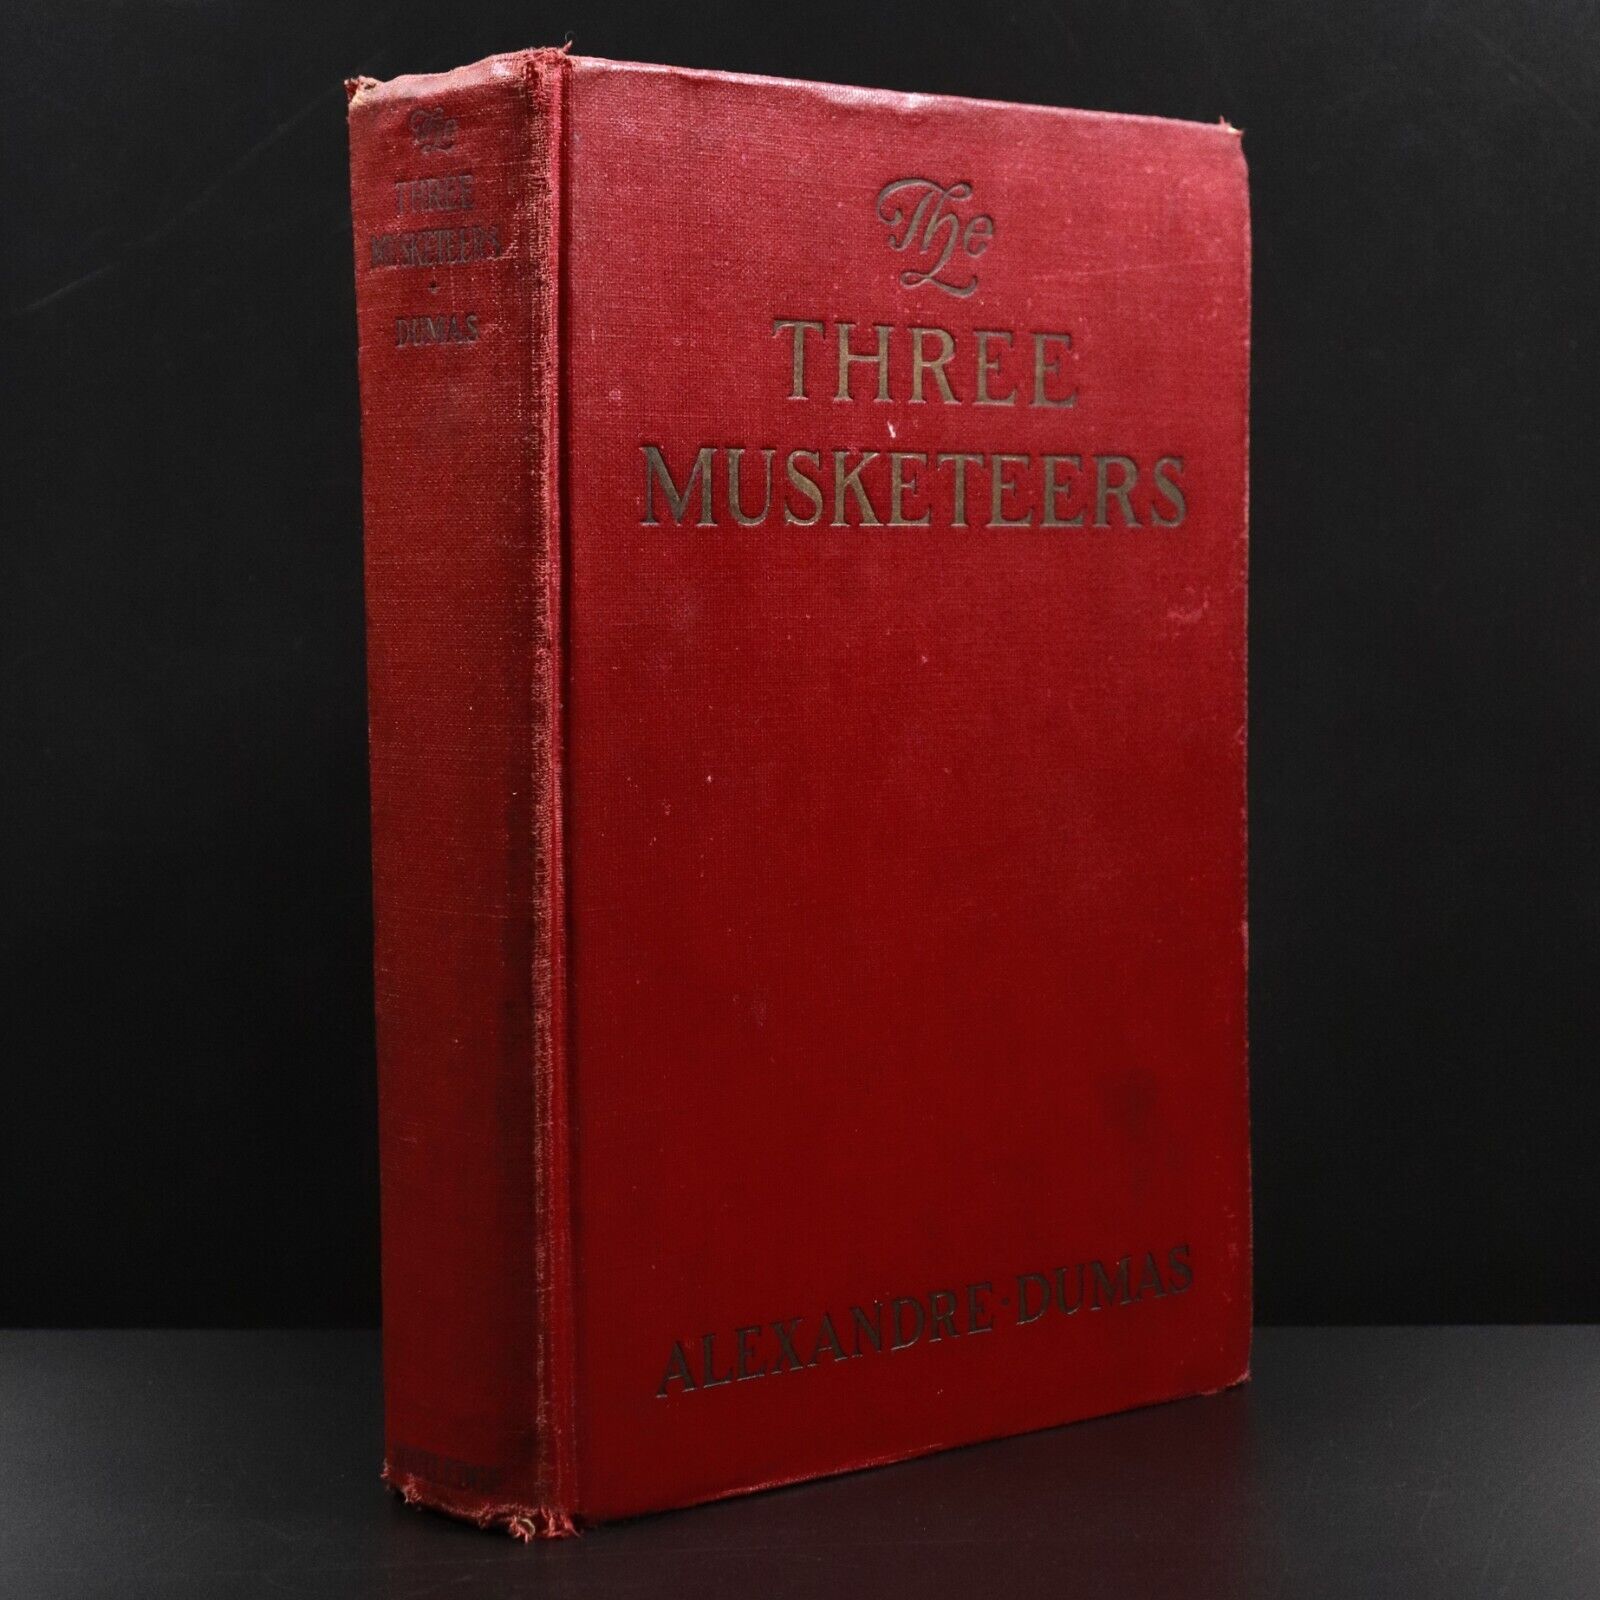 1922 The Three Musketeers by Alexandre Dumas Vintage Classic Fiction Book